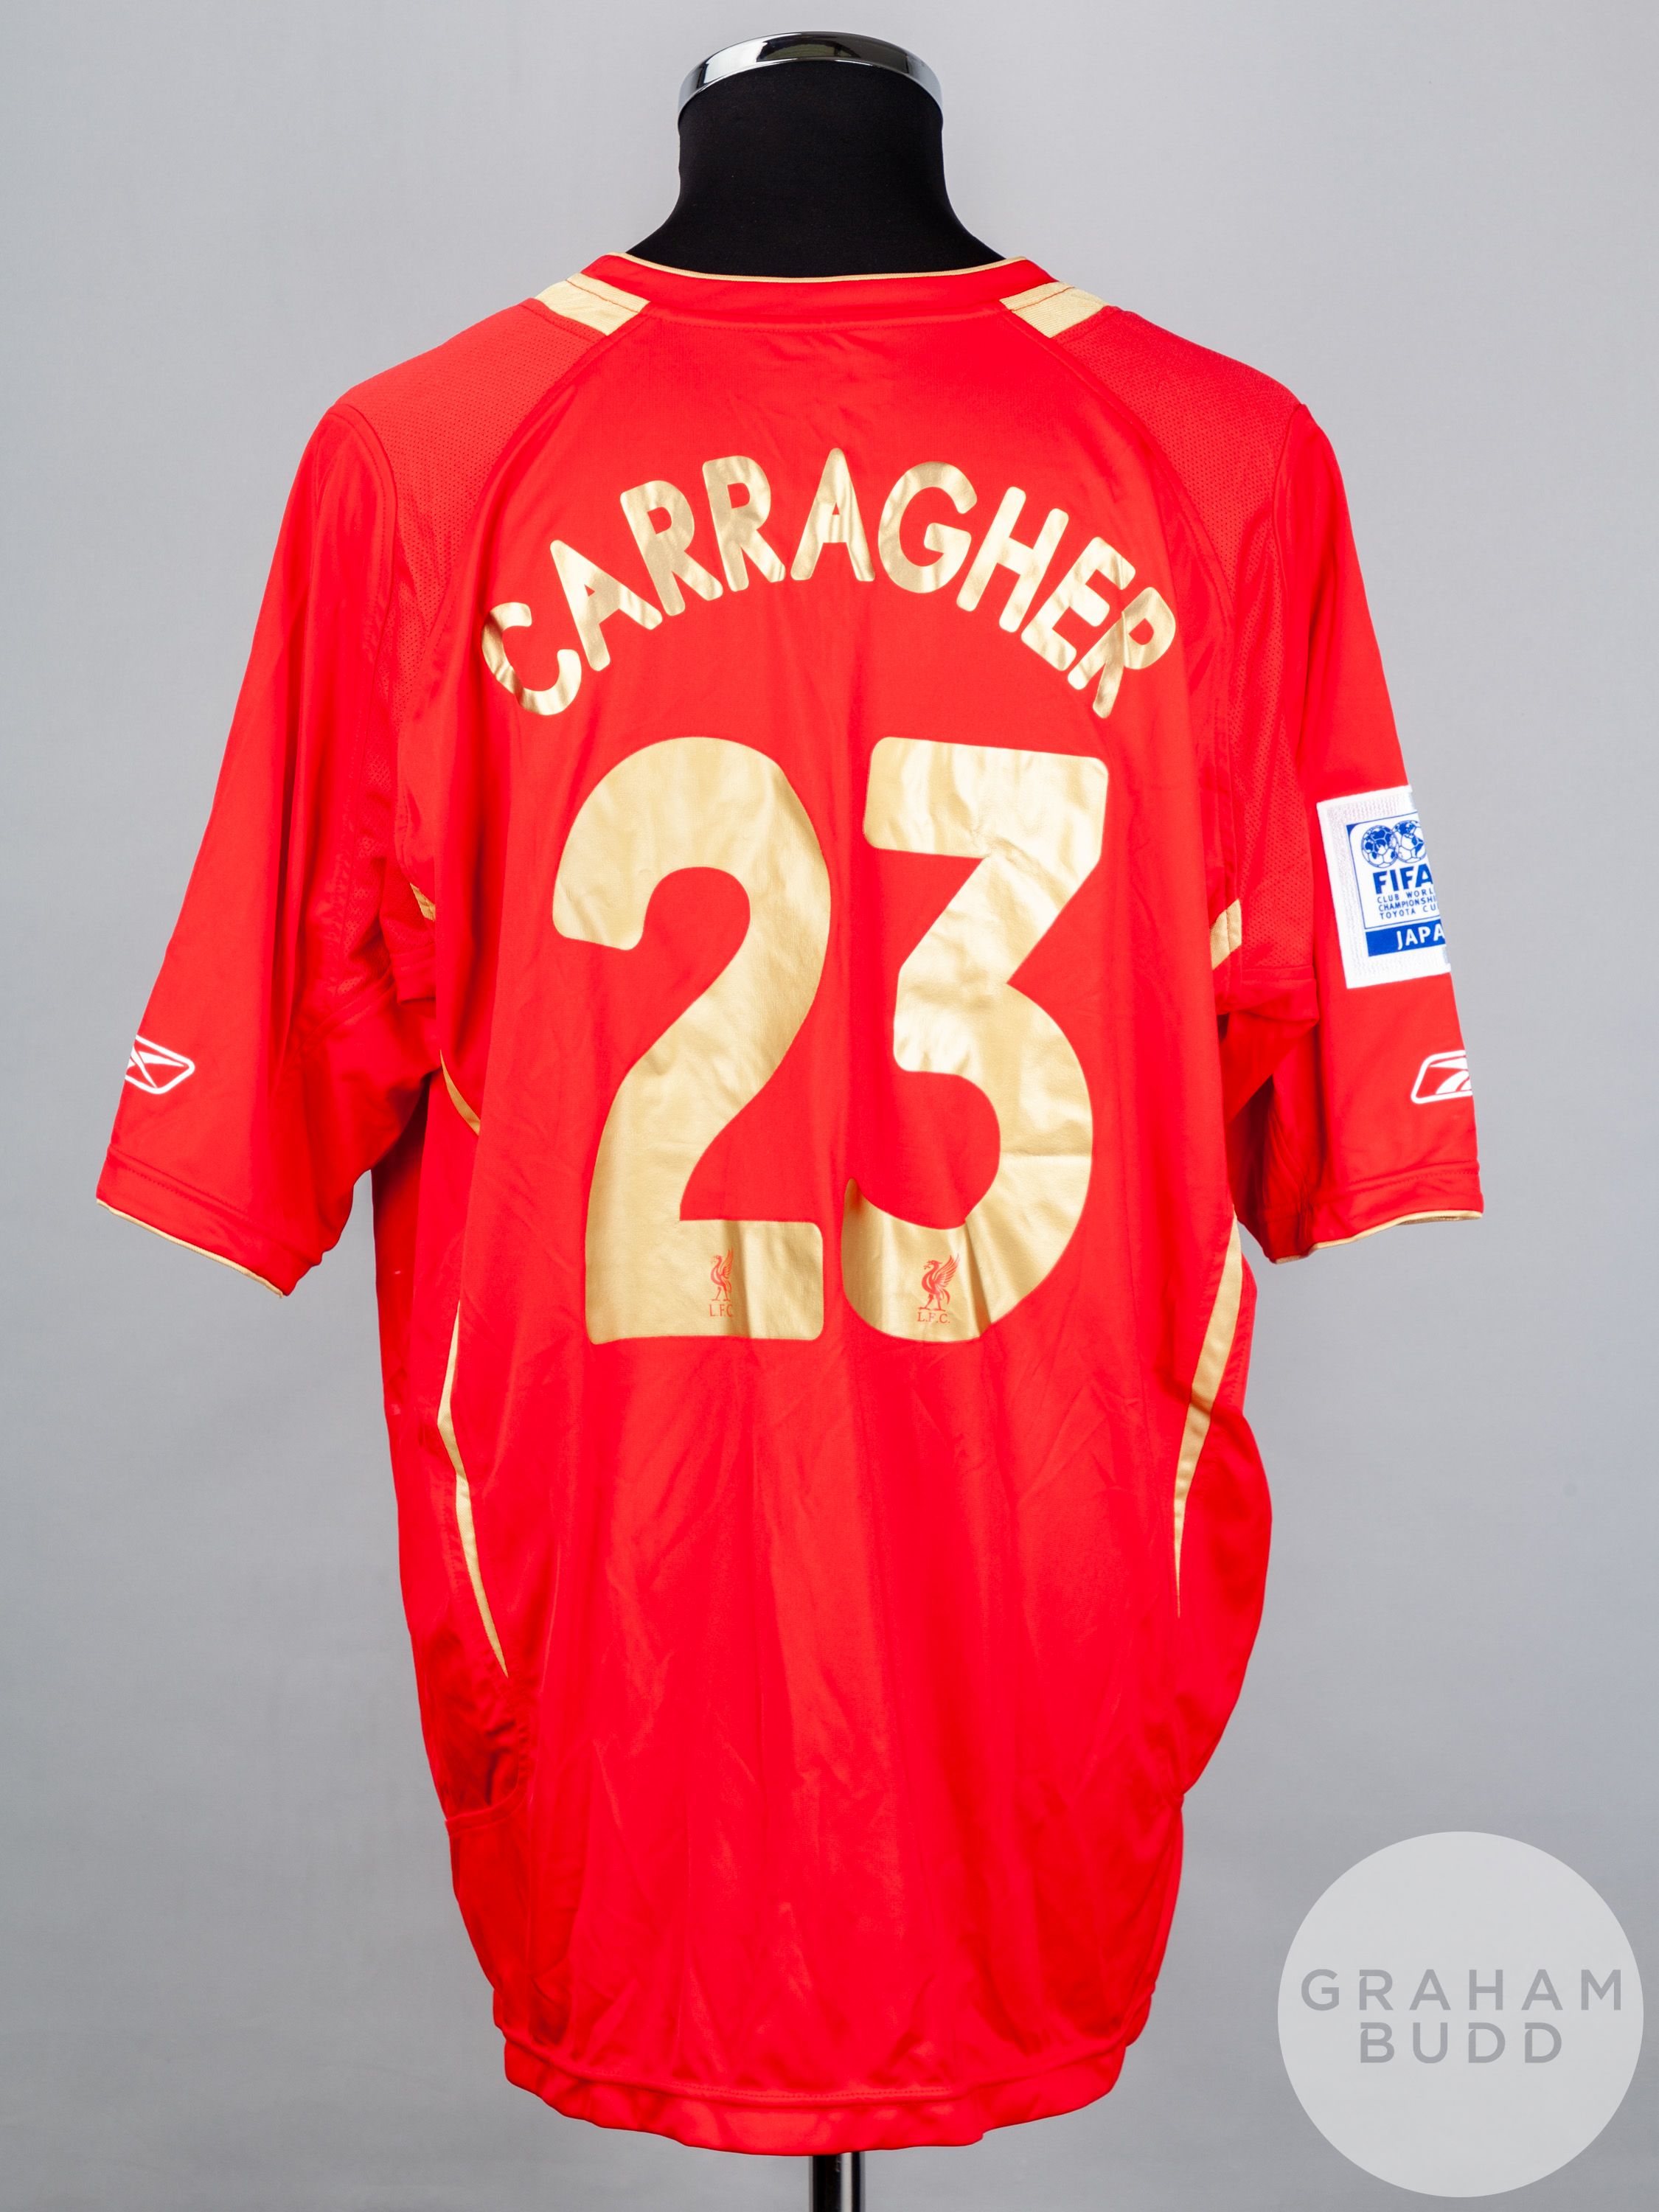 Jamie Carragher red and gold No.23 Liverpool Club World Championship short-sleeved shir - Image 2 of 5